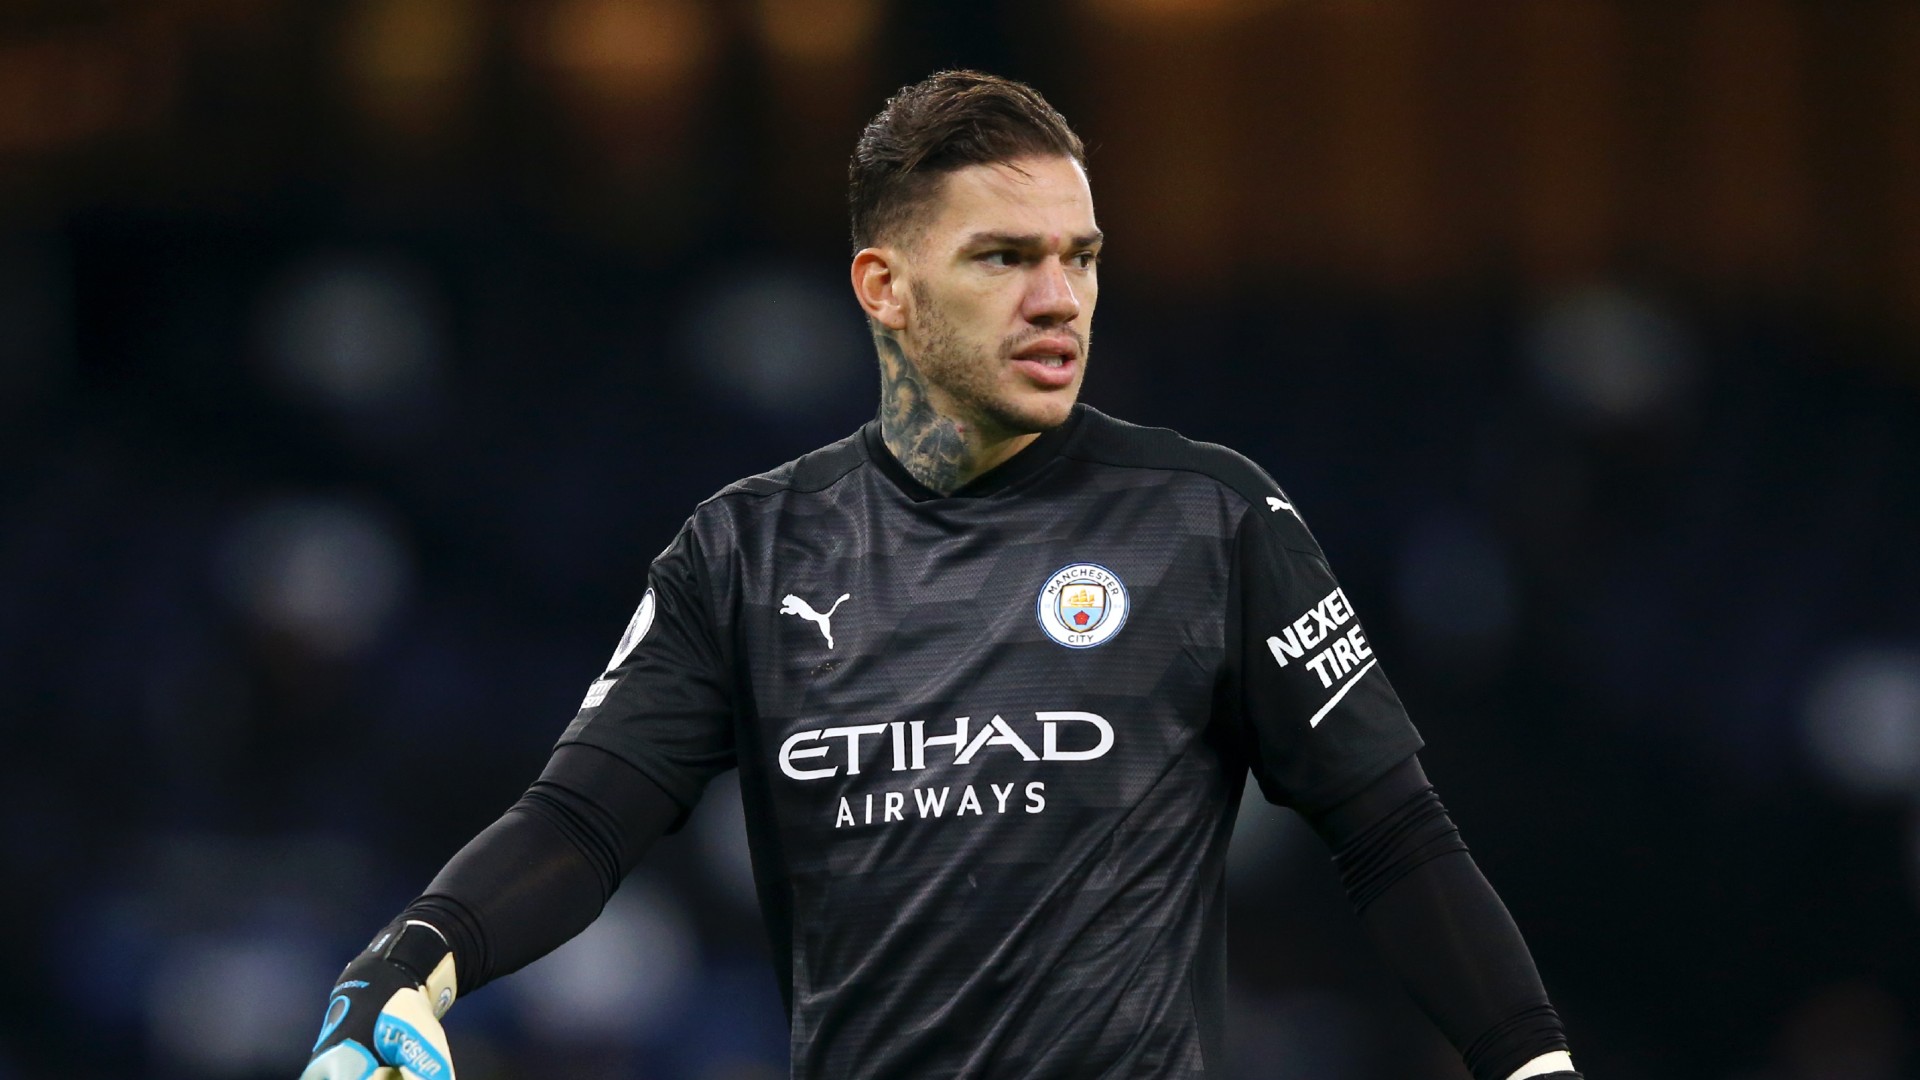 Guardiola: Ederson might be Manchester City's new penalty taker